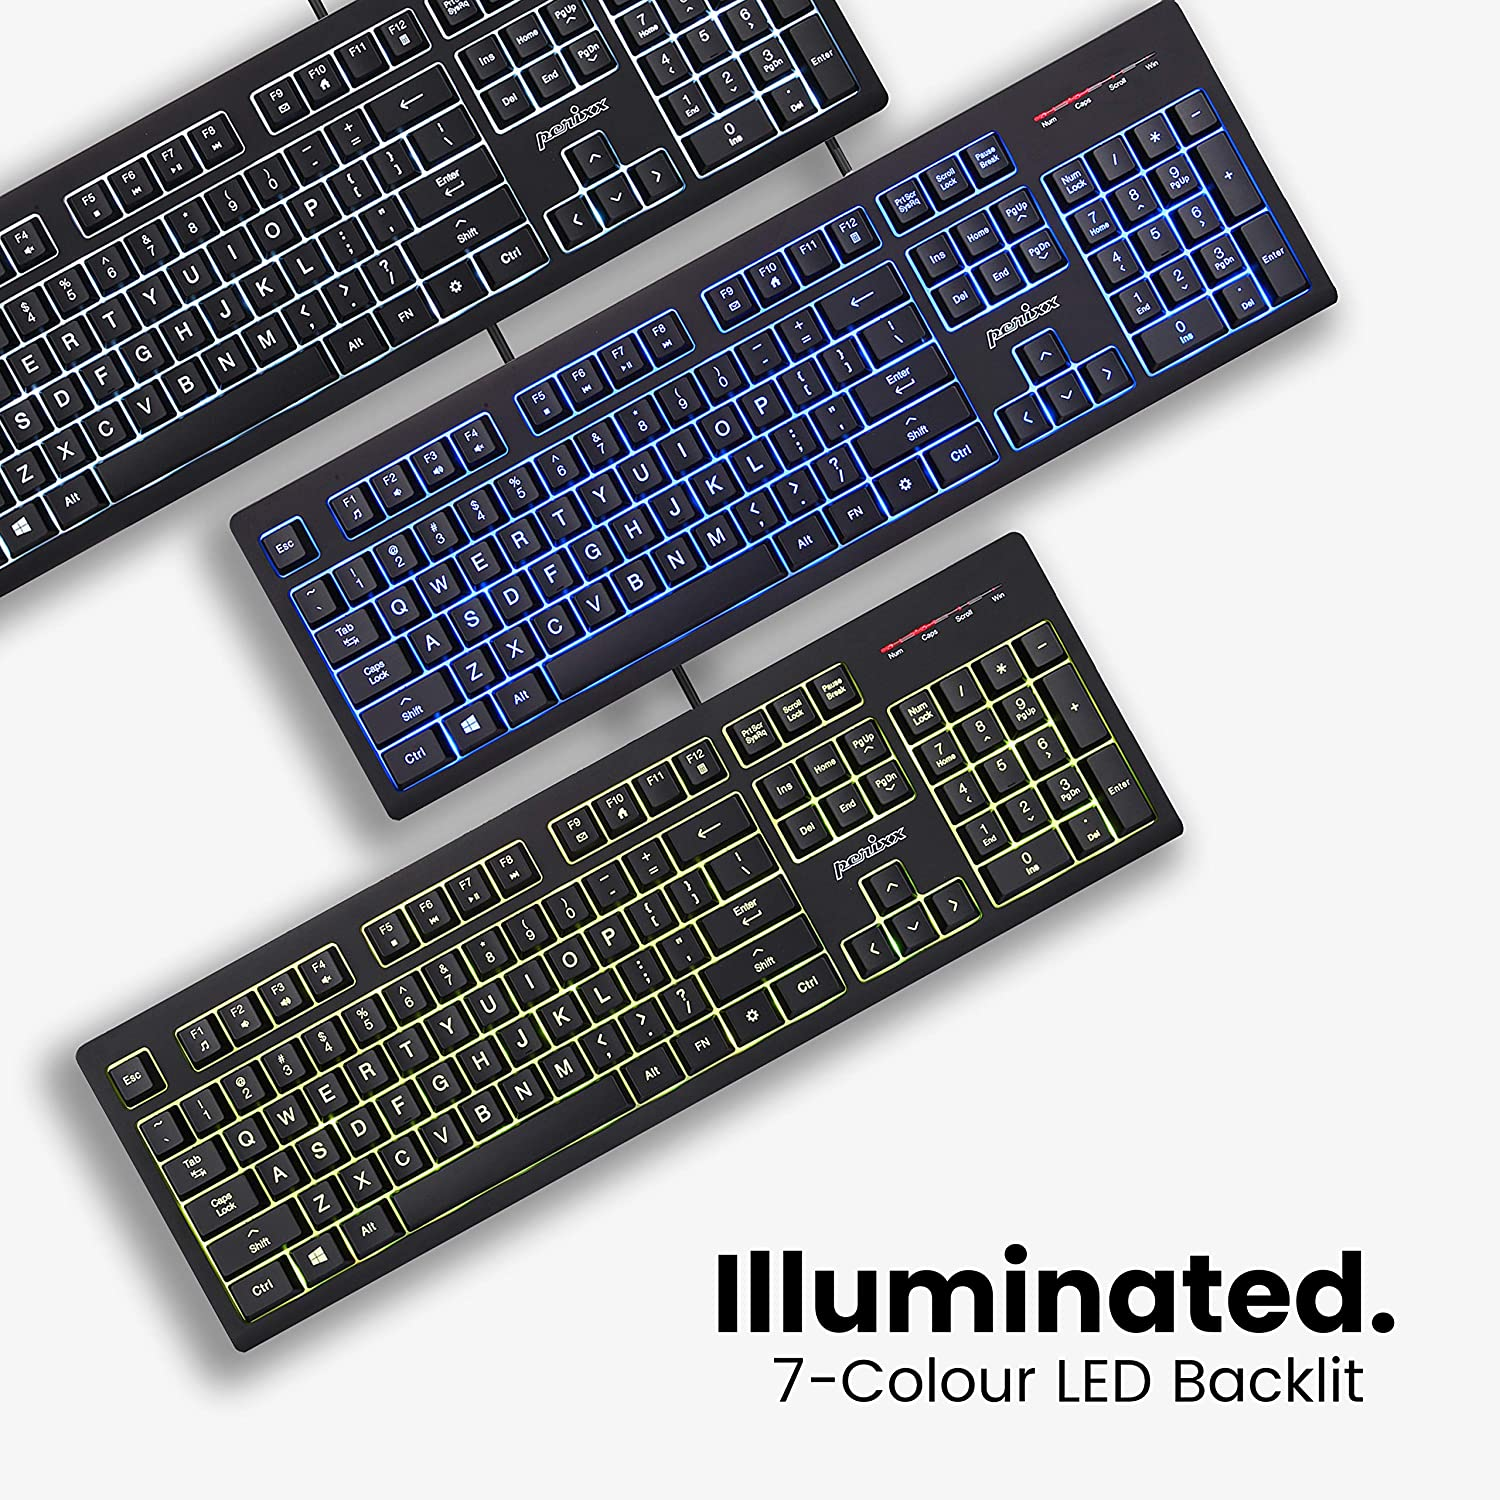 Perixx PERIBOARD-329 Wired USB Backlit Keyboard with 7-Color Illuminated LED - Black (11663)